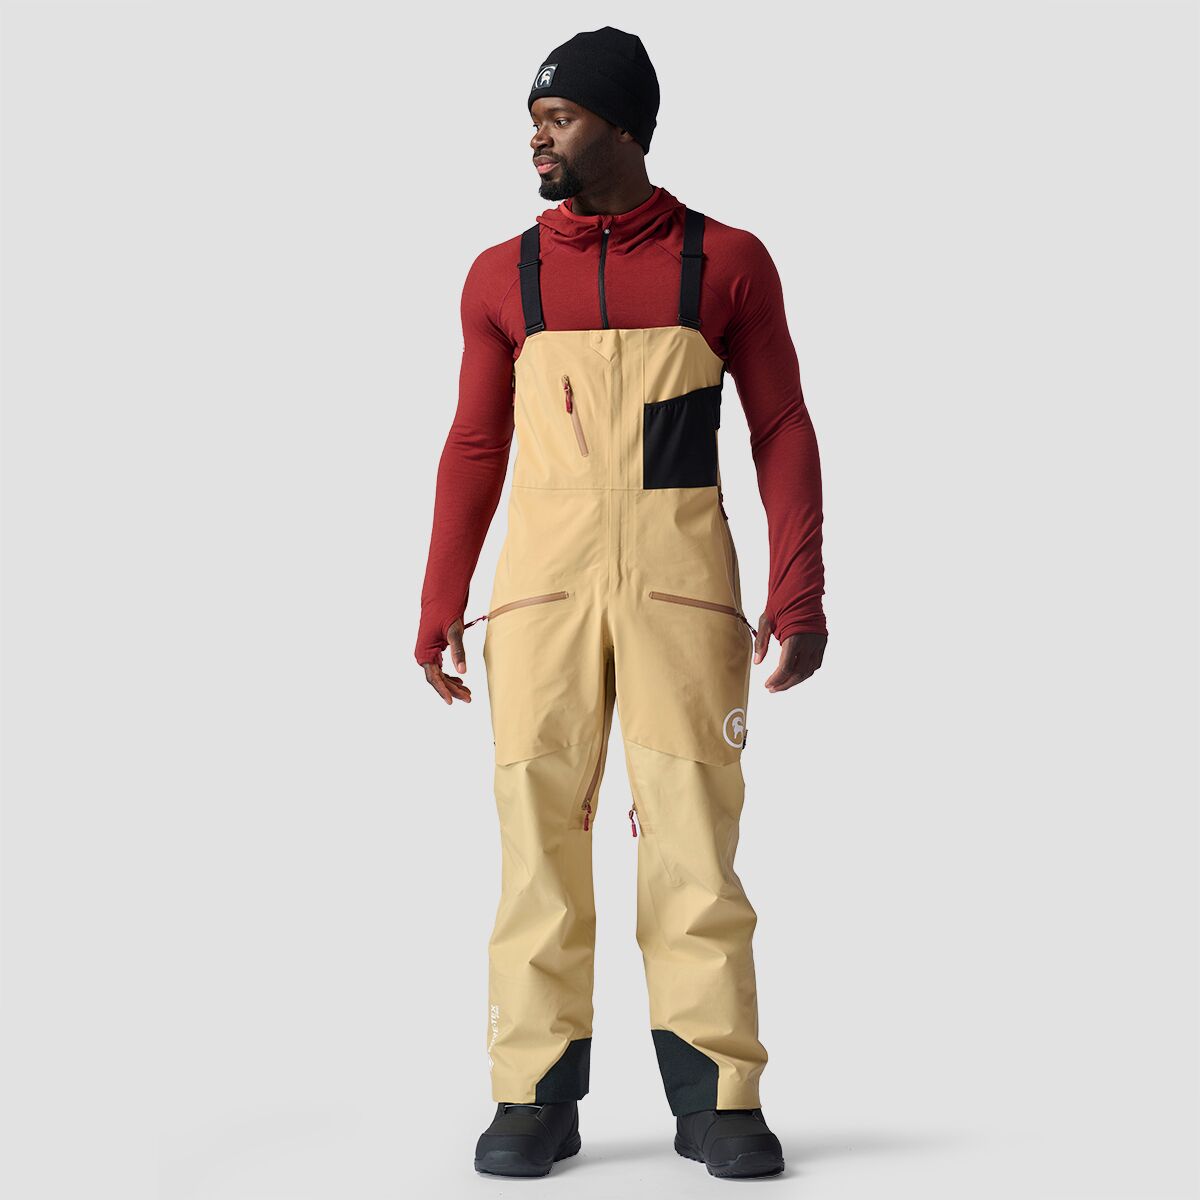 https://www.backcountry.com/images/items/1200/BCC/BCCZ2SH/STA.jpg